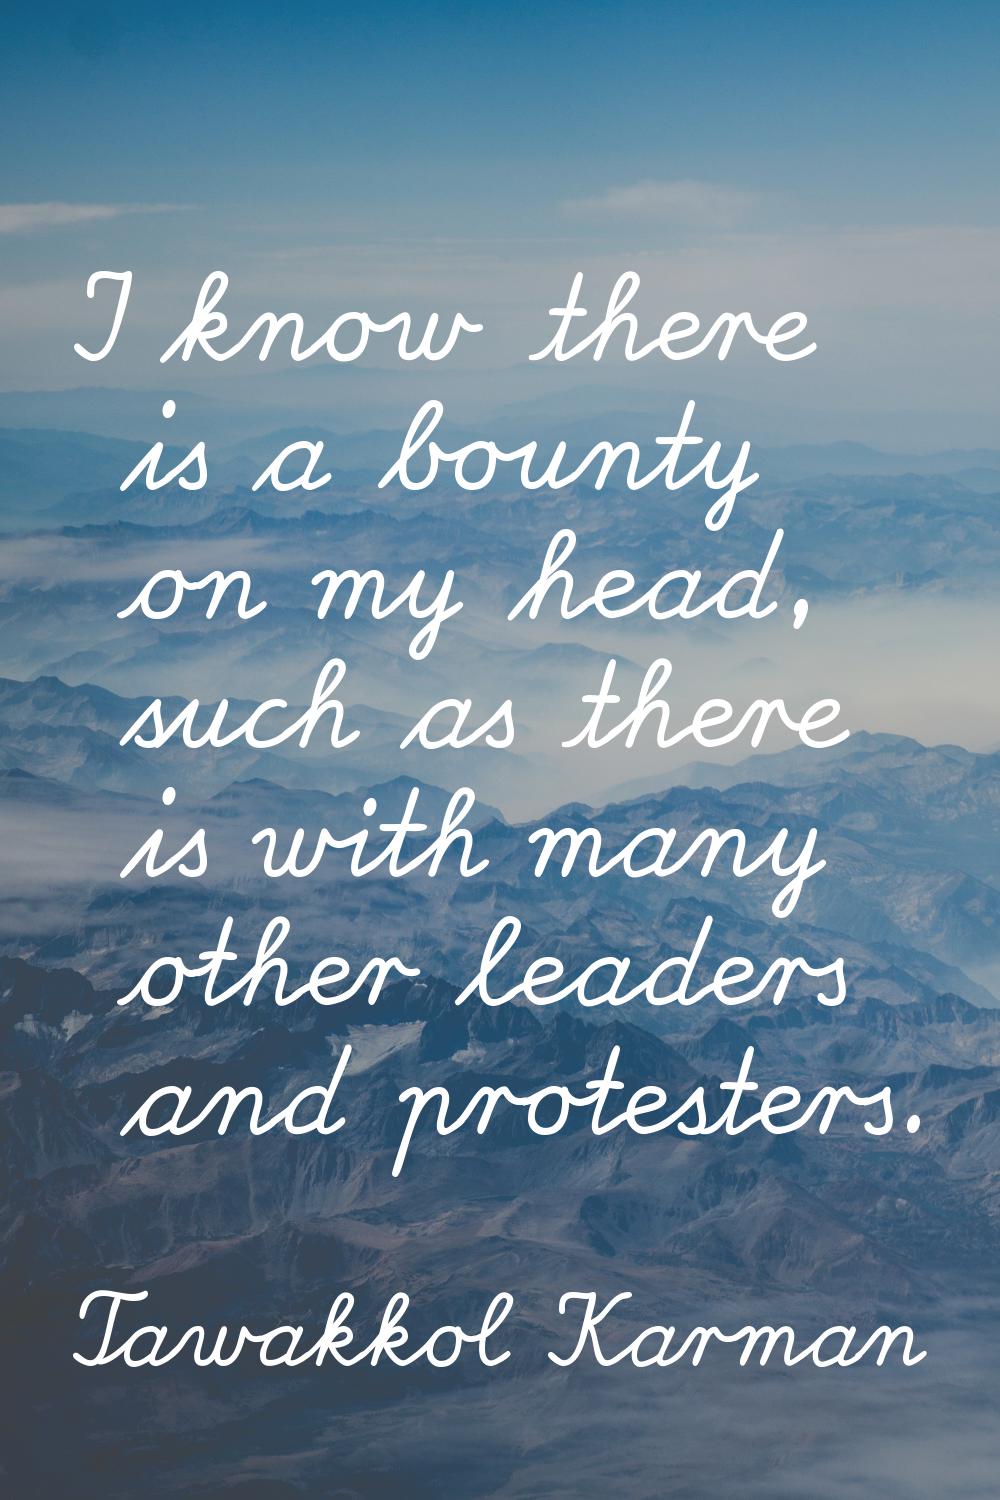 I know there is a bounty on my head, such as there is with many other leaders and protesters.